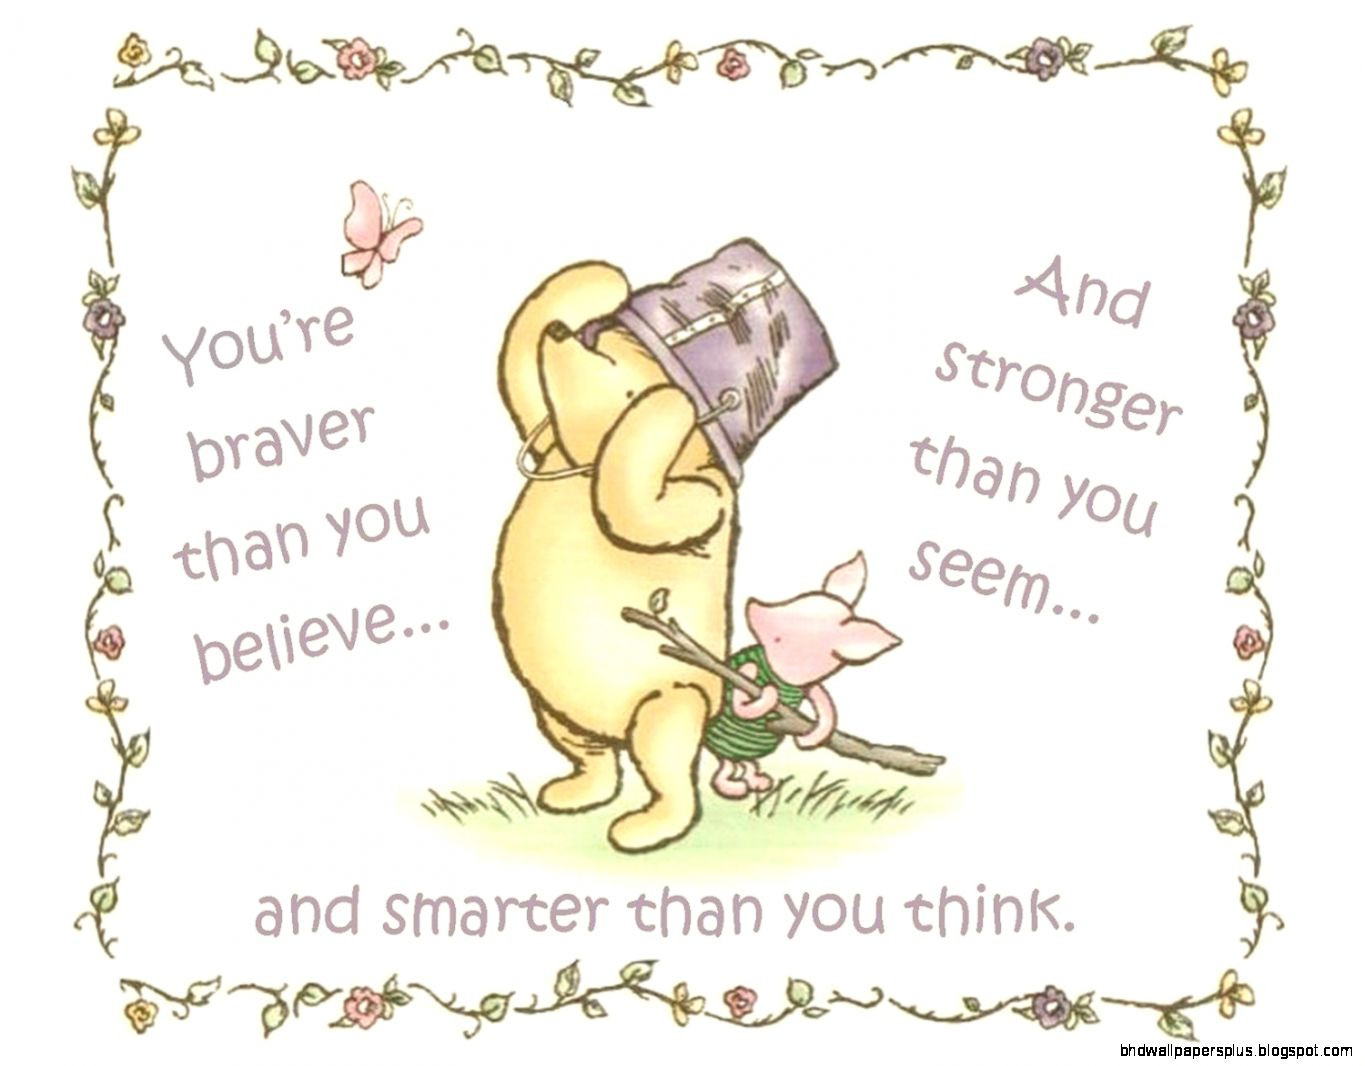 Winnie The Pooh Quotes Friendship
 Friendship Quotes Winnie The Pooh